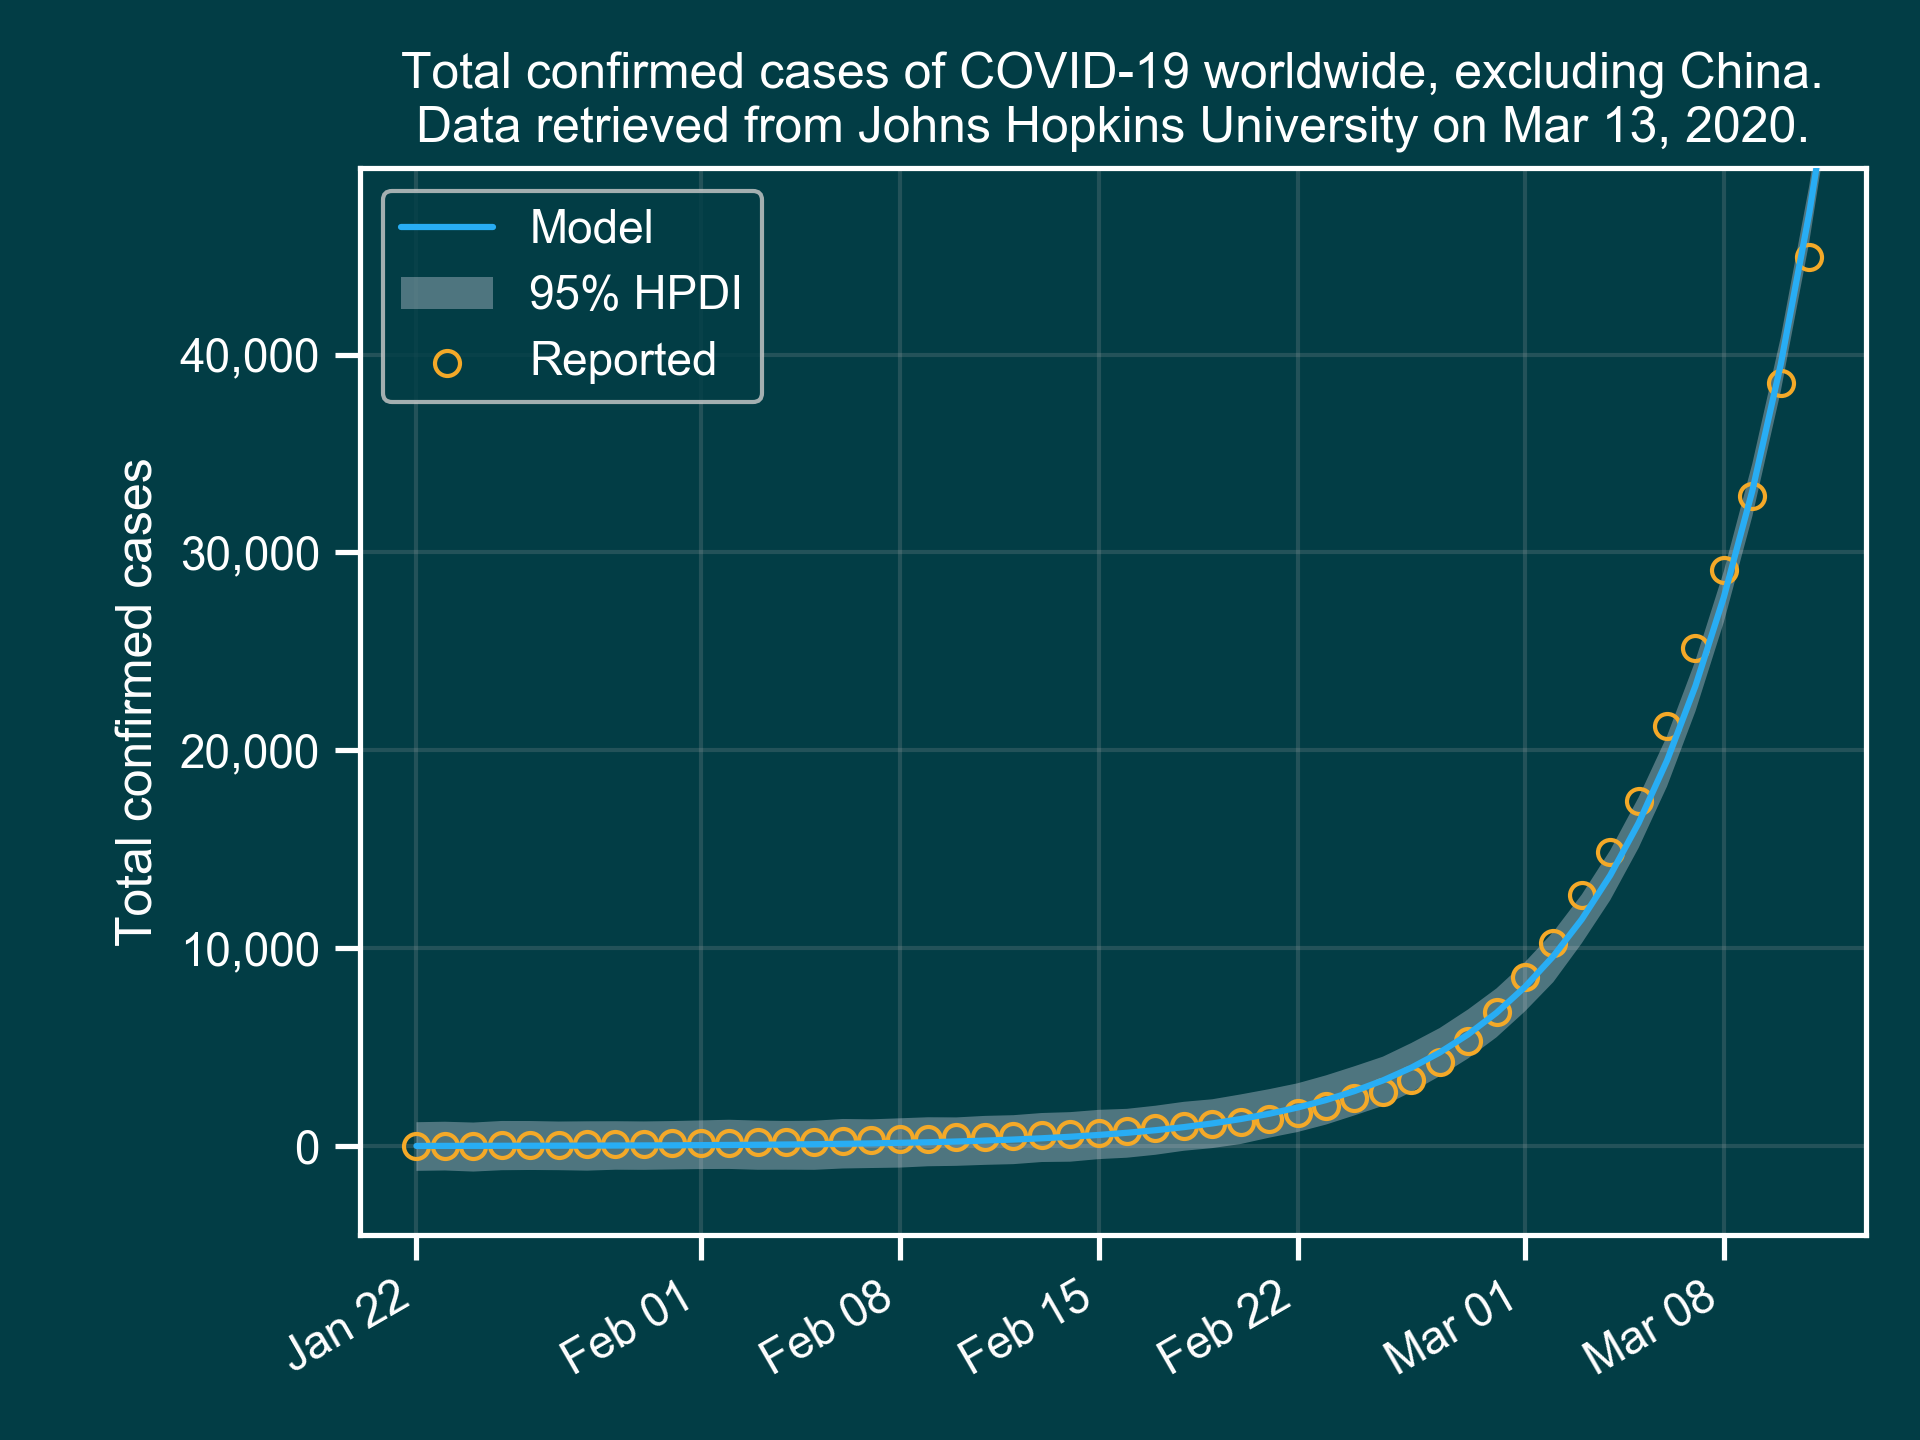 Modeling confirmed cases of COVID-19 with logistic function